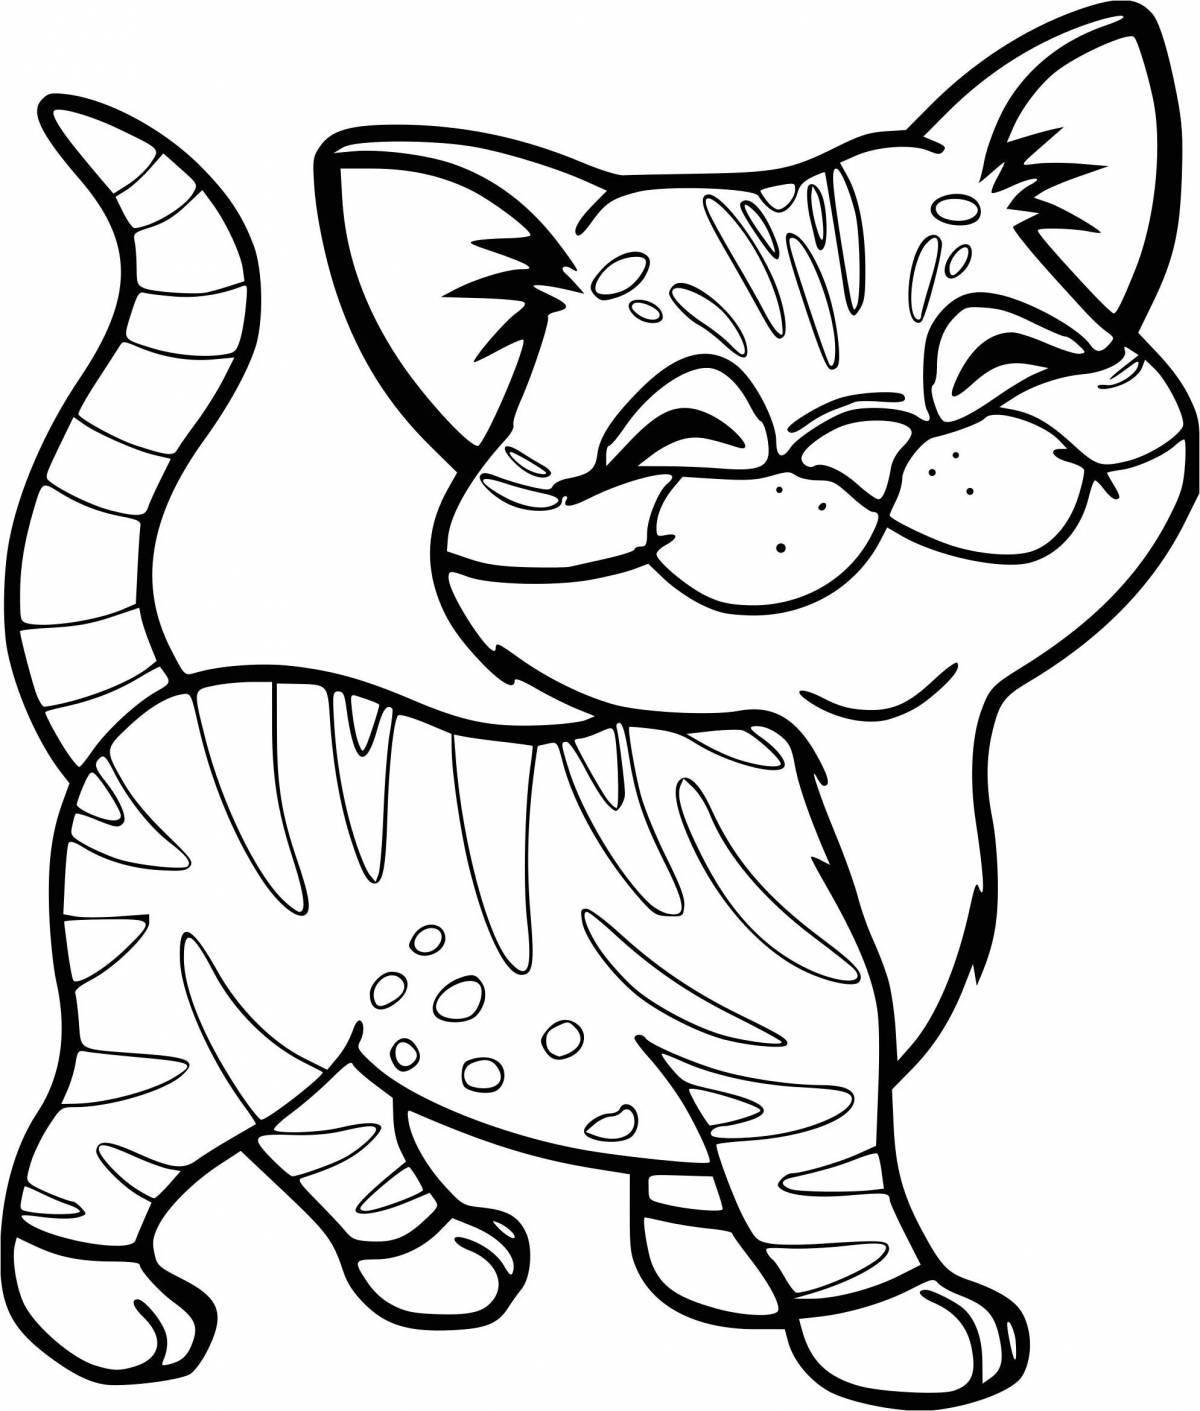 Fashion coloring cat rudolph